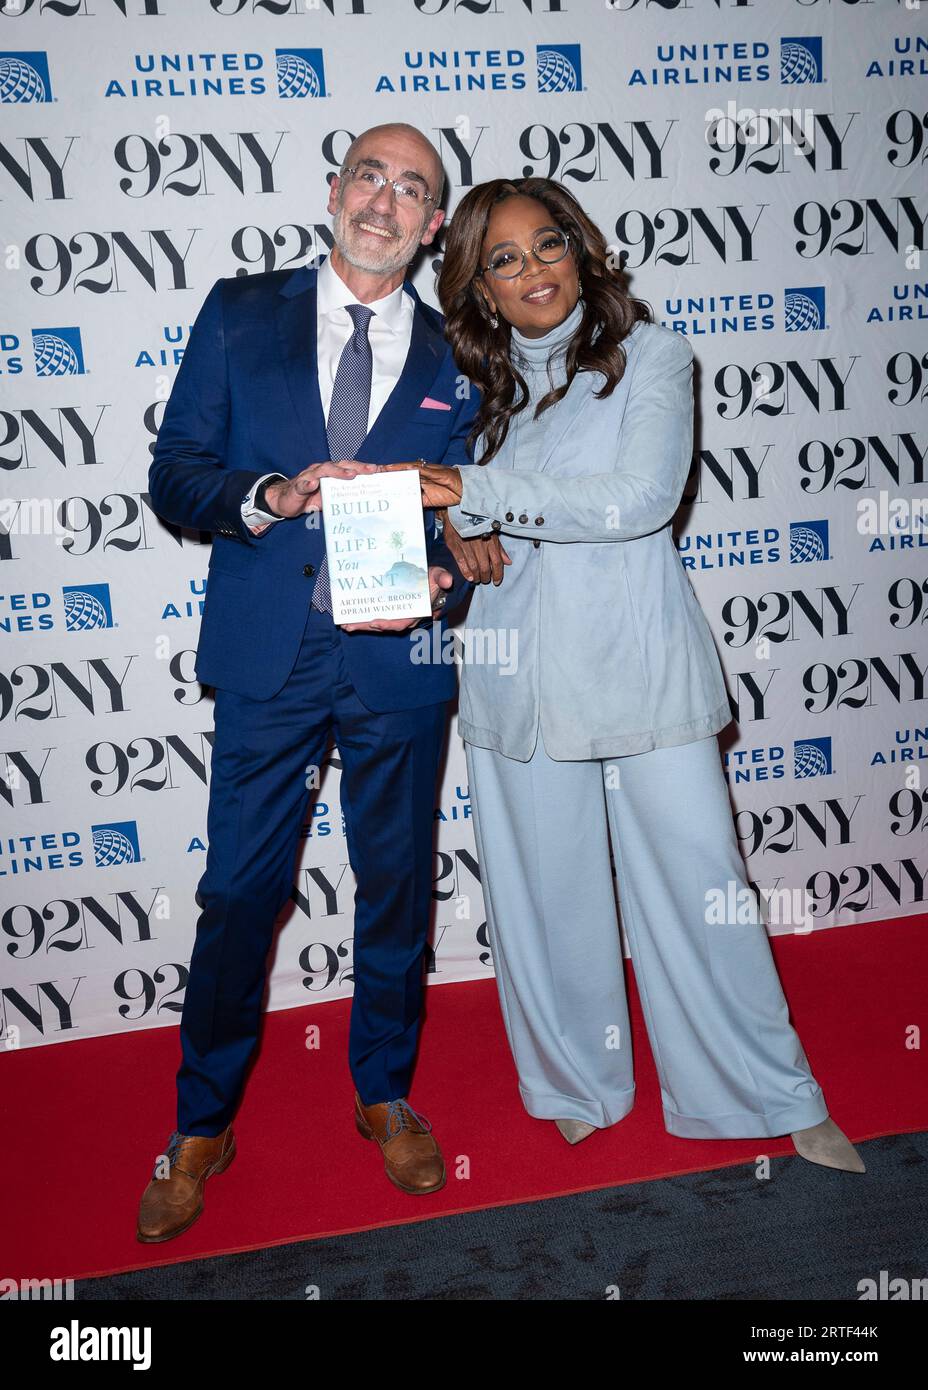 https://c8.alamy.com/comp/2RTF44K/arthur-c-brooks-and-oprah-winfrey-pose-backstage-before-discussing-their-new-book-building-the-life-you-want-the-art-and-science-of-getting-happier-at-the-92nd-street-y-on-tuesday-sept-12-2023-in-new-york-photo-by-christopher-smithinvisionap-2RTF44K.jpg